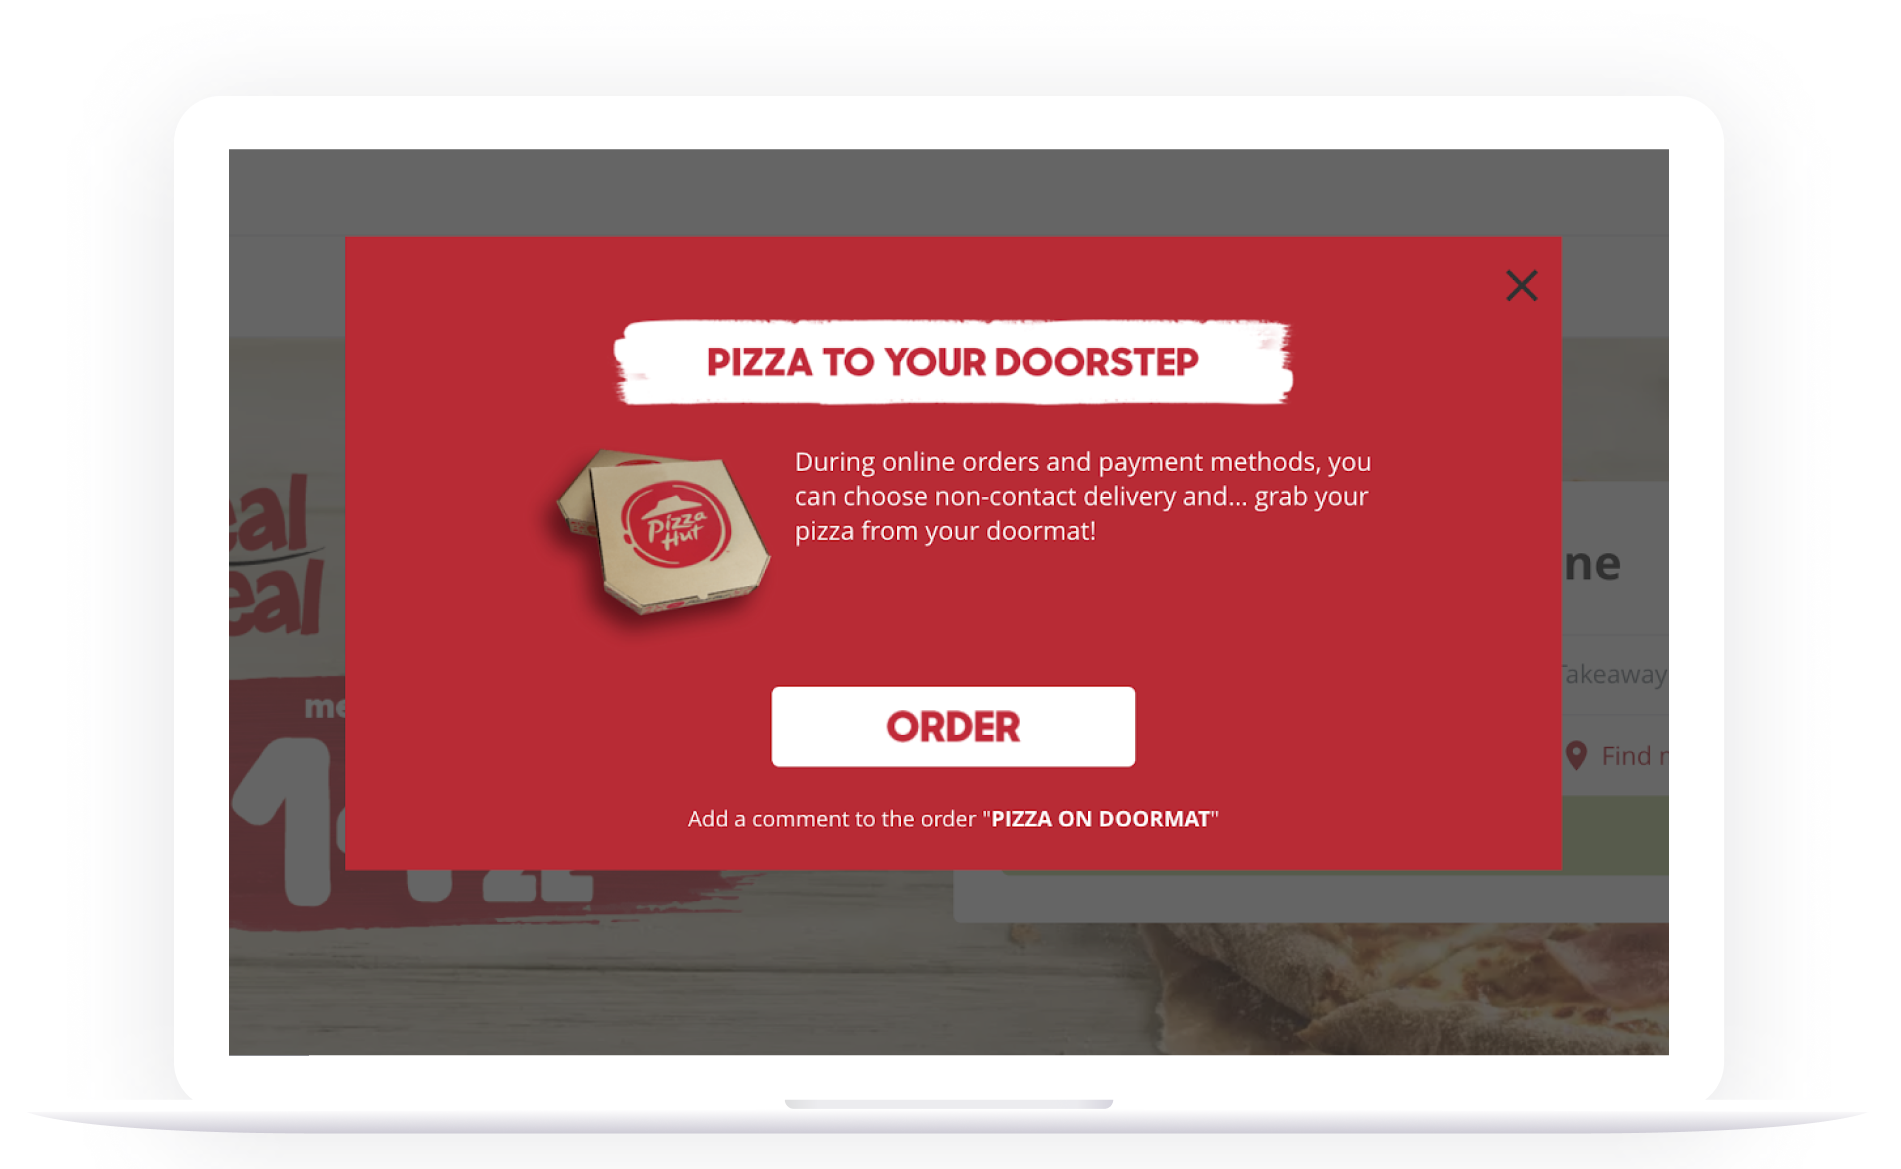 Pizza Hut's new feature - contact-free delivery